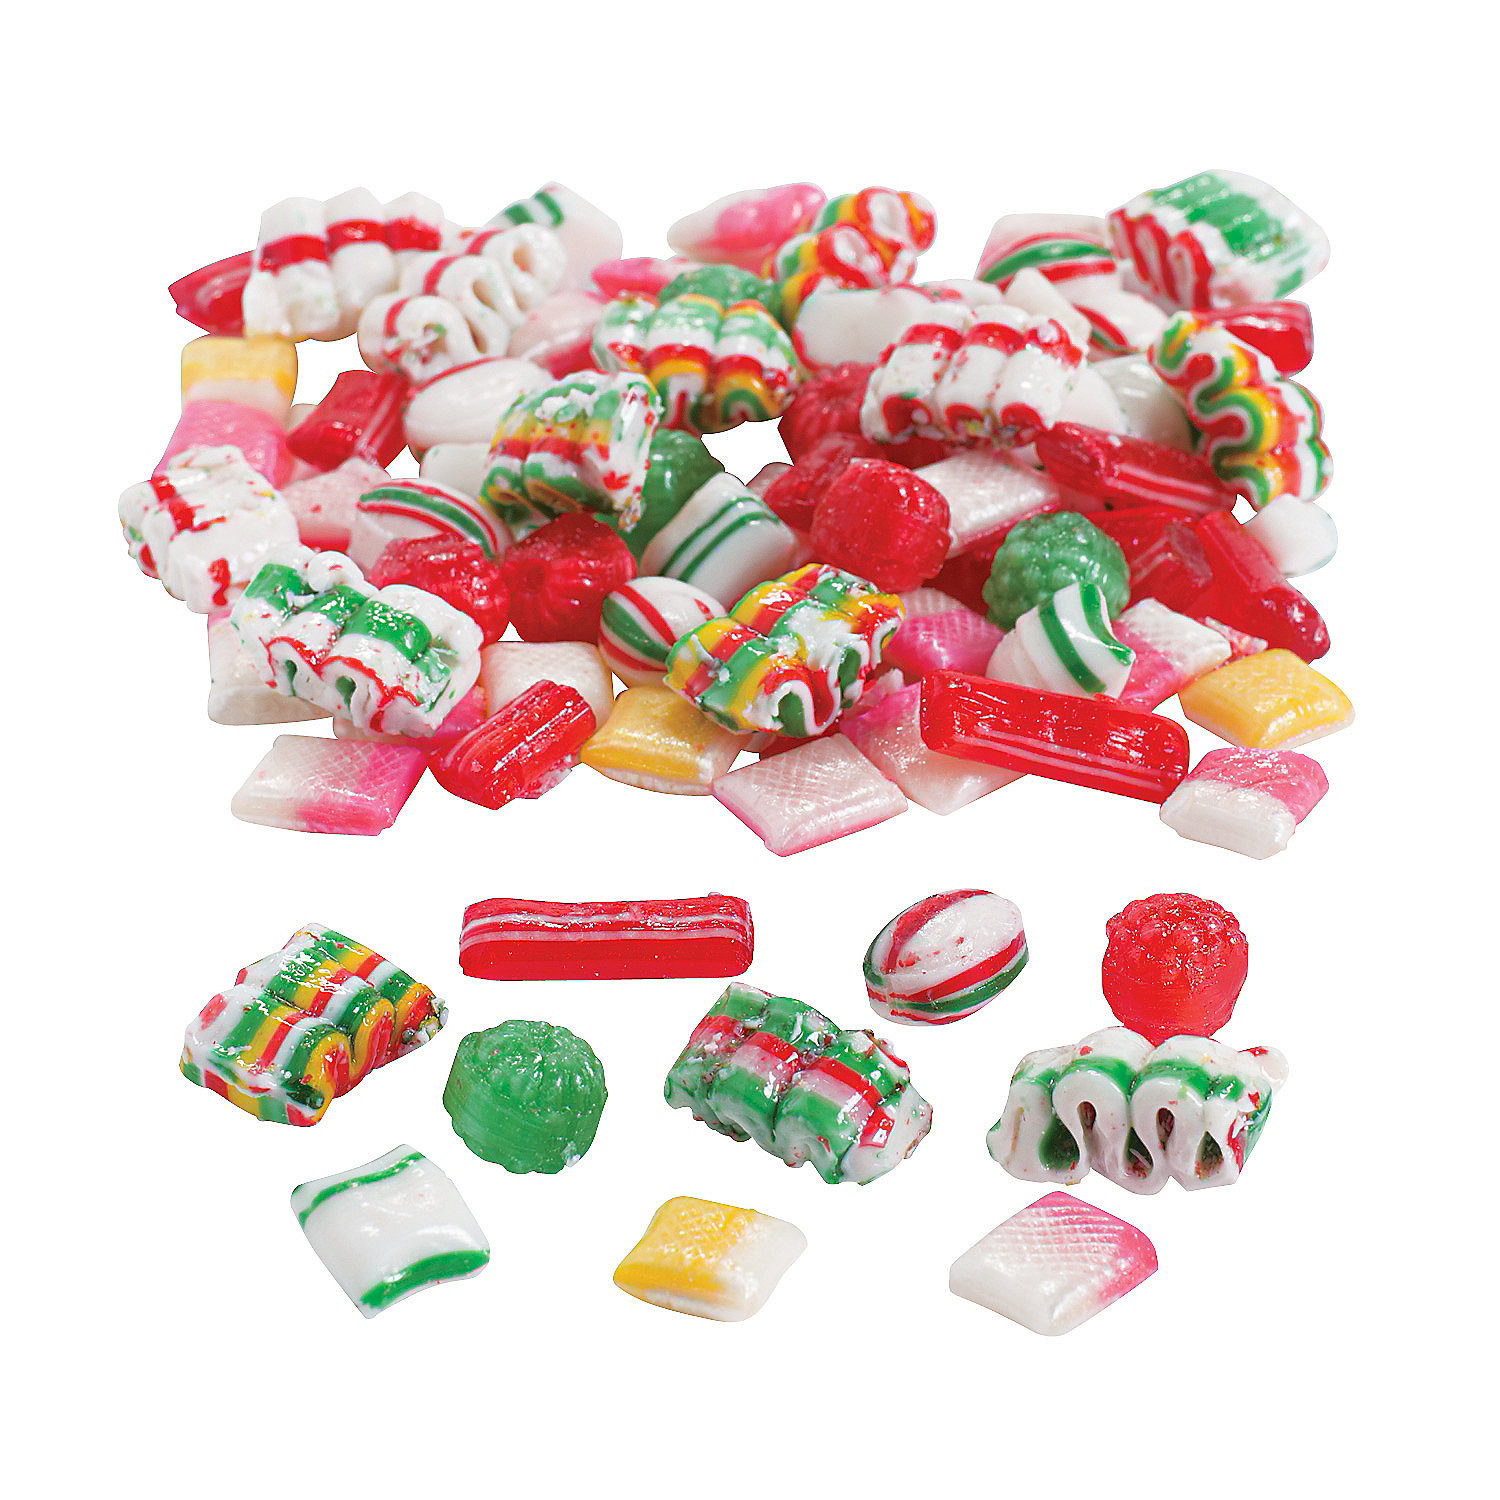 Old Fashioned Christmas Candy
 Brach’s Holiday Old Fashioned Candy Mix Oriental